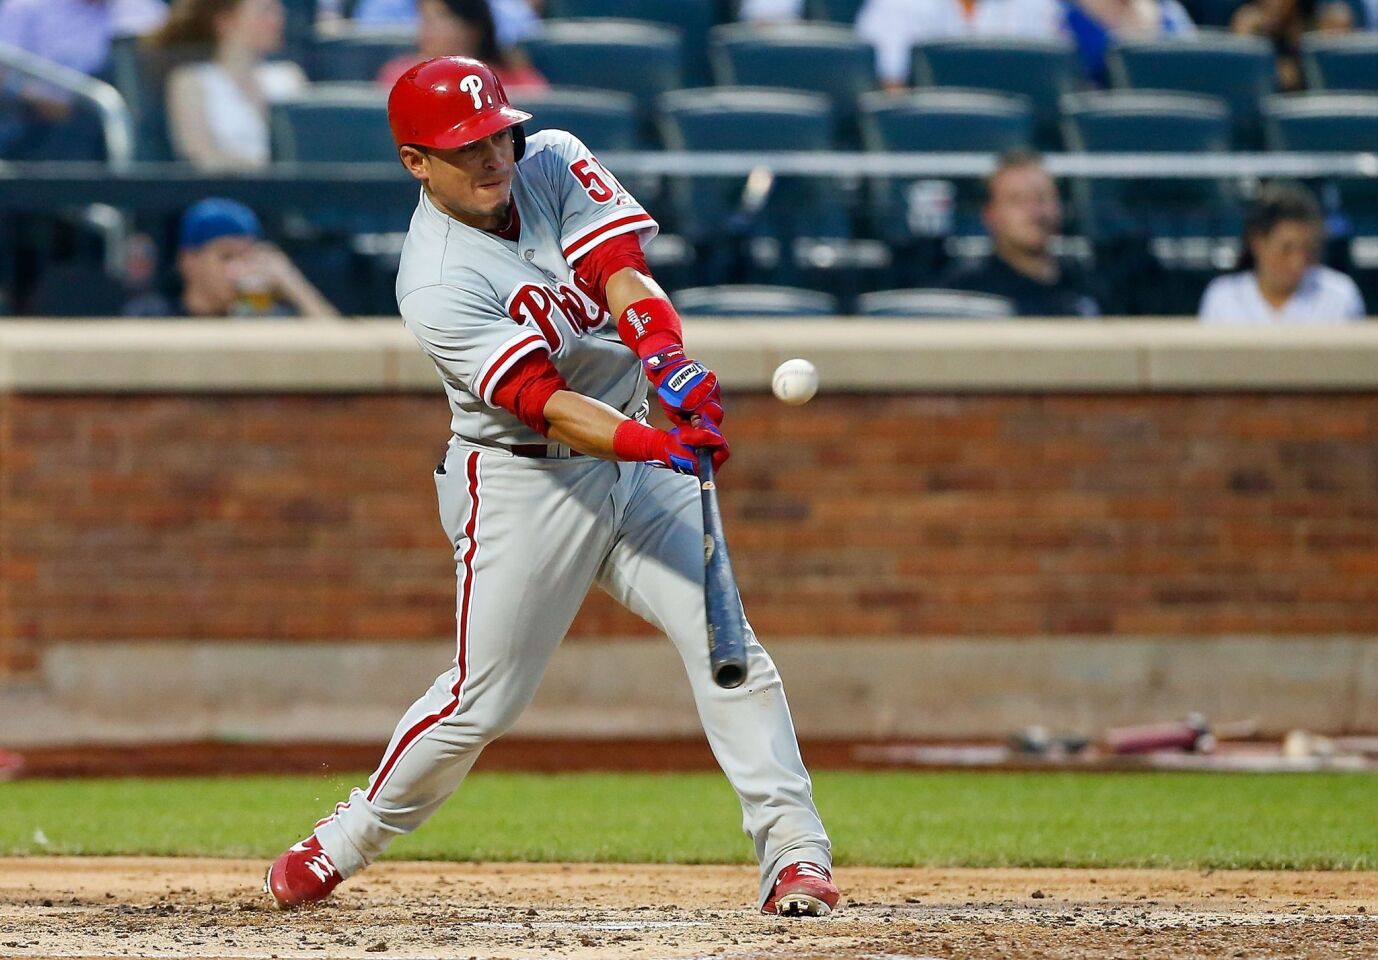 Philadelphia Phillies catcher Carlos Ruiz was suspended for the team's first 25 games of the 2013 season after testing positive for an amphetamine.